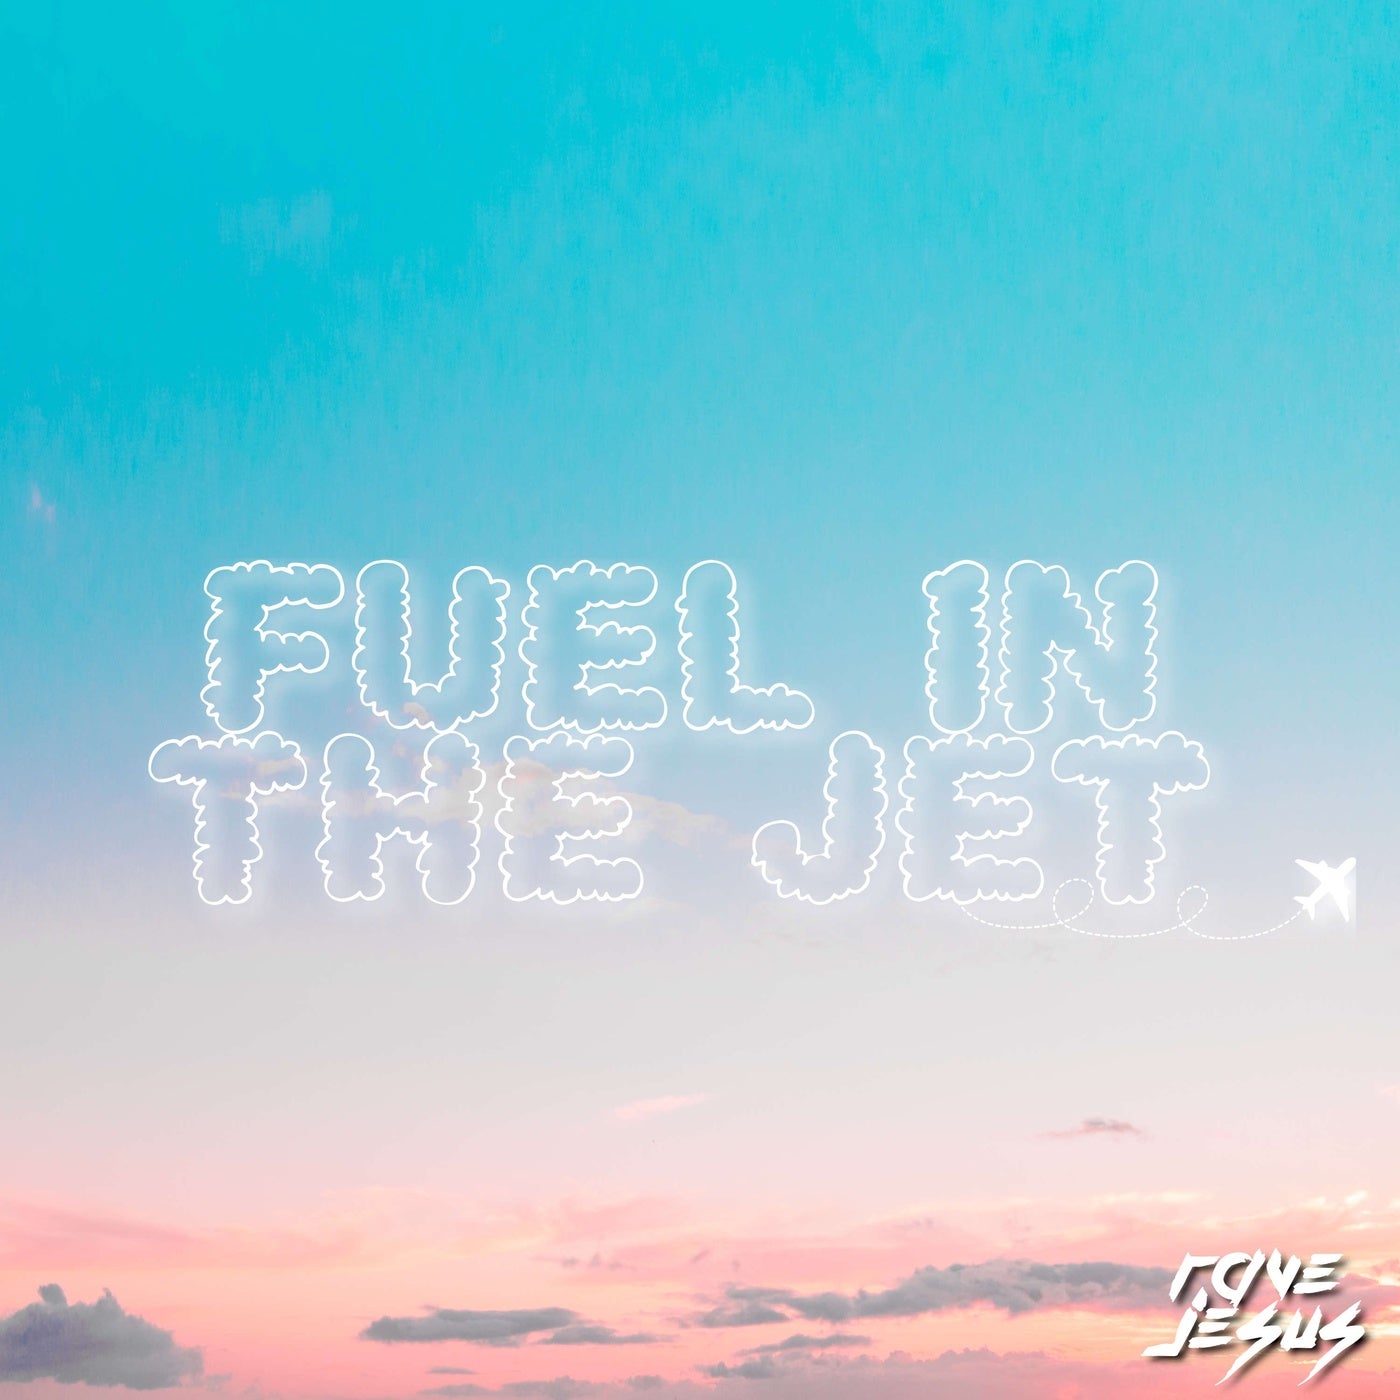 Fuel In The Jet